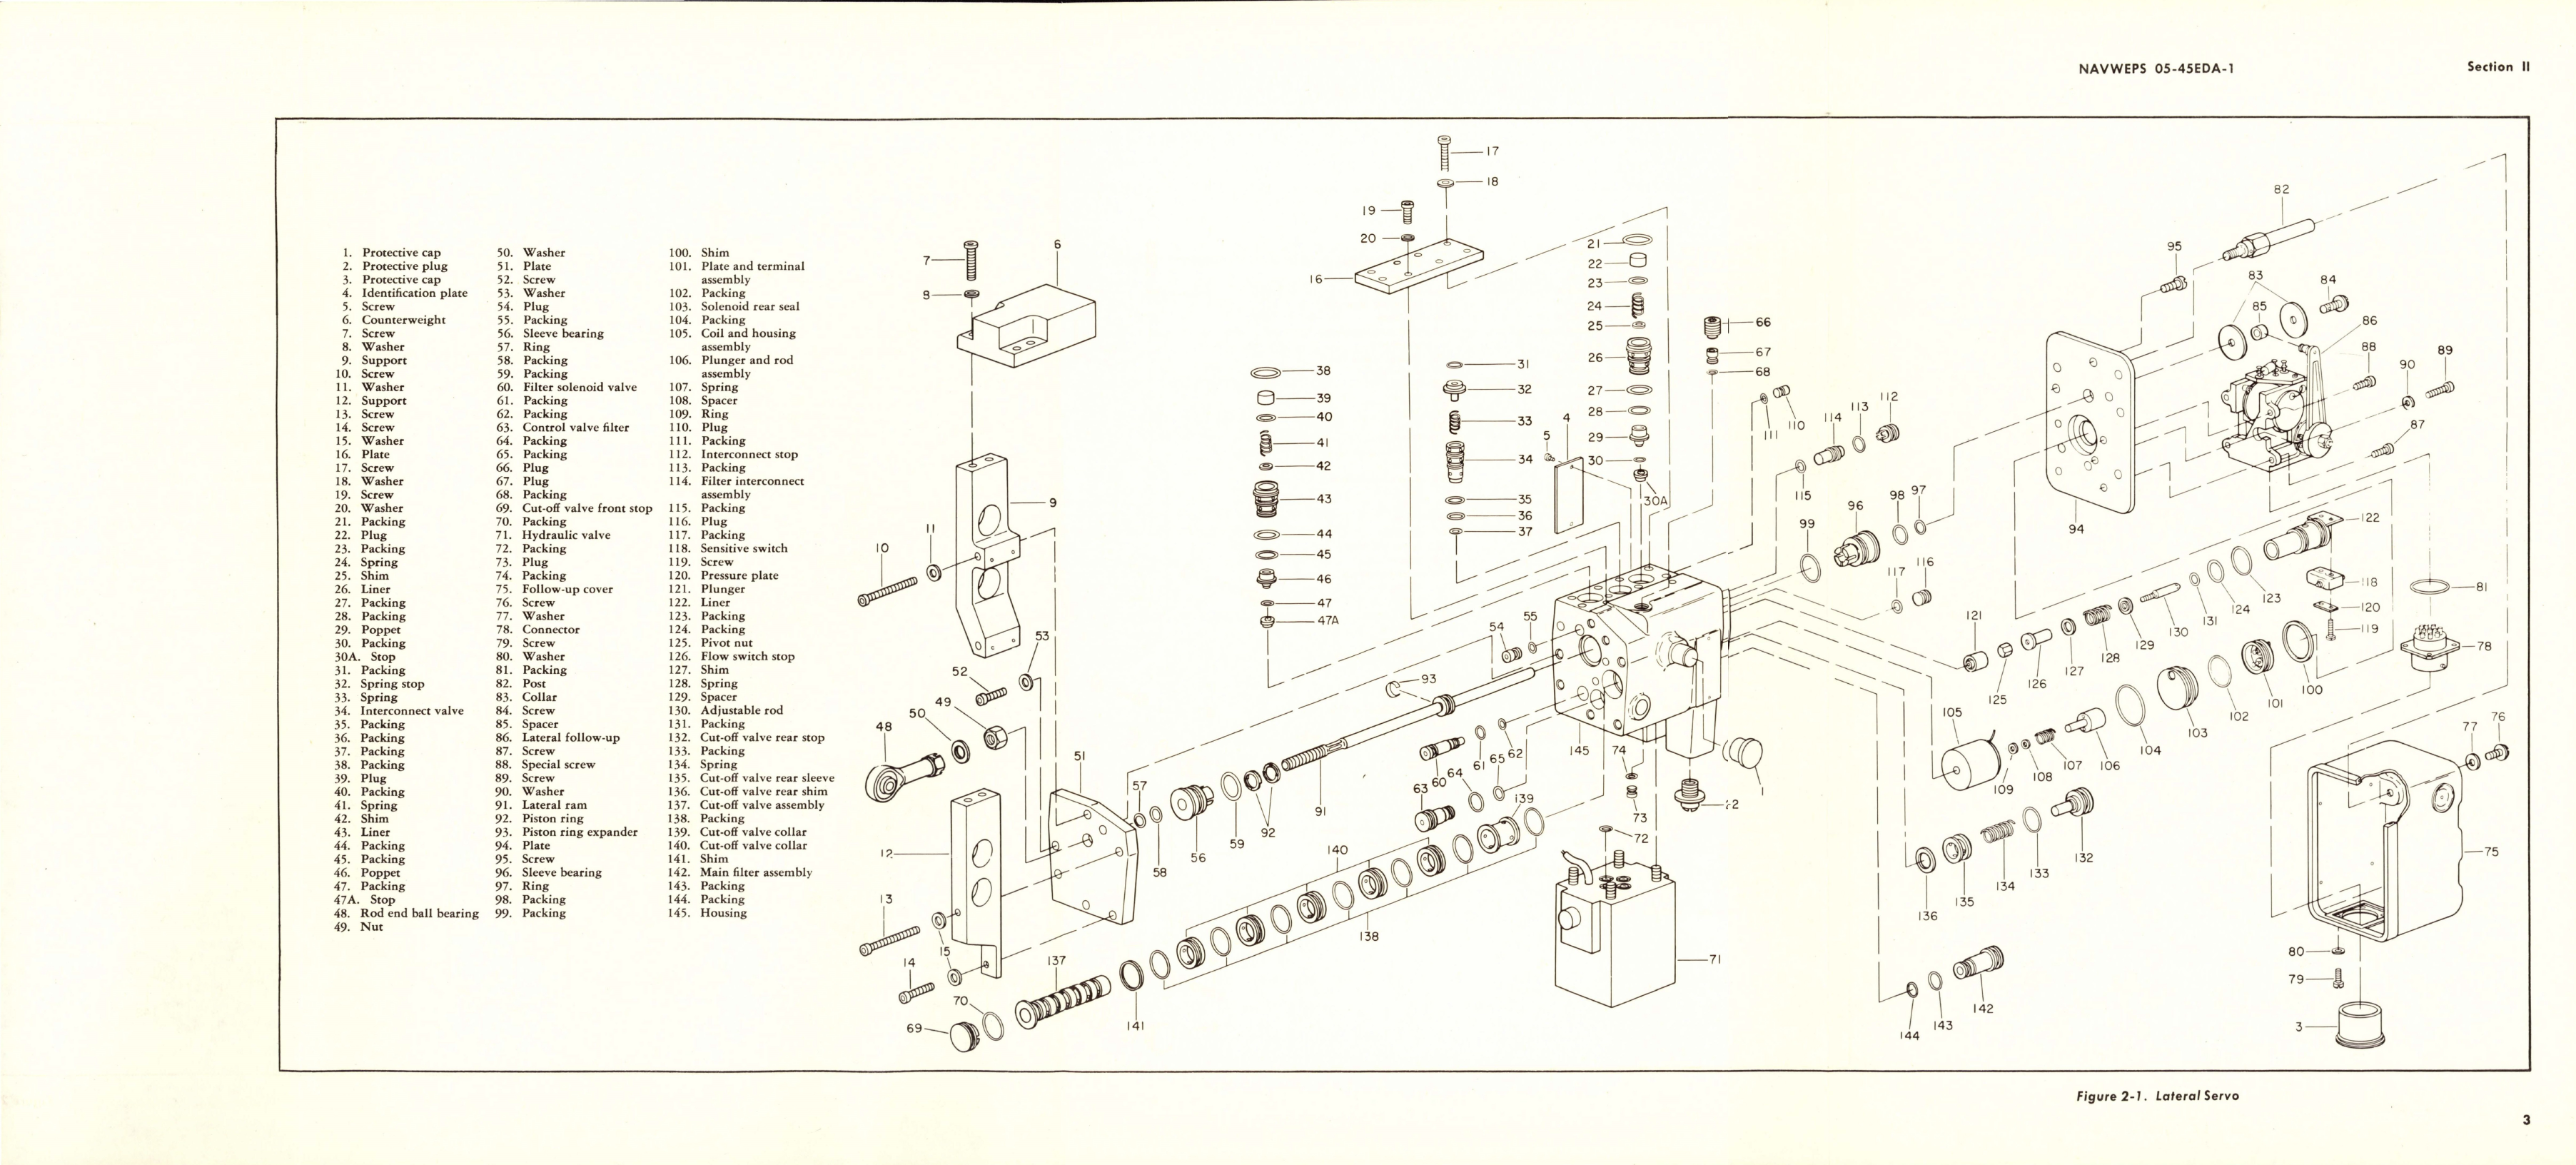 Sample page 7 from AirCorps Library document: Overhaul Instructions for Lateral Servo - Parts 16708-1-E and16730-1-A